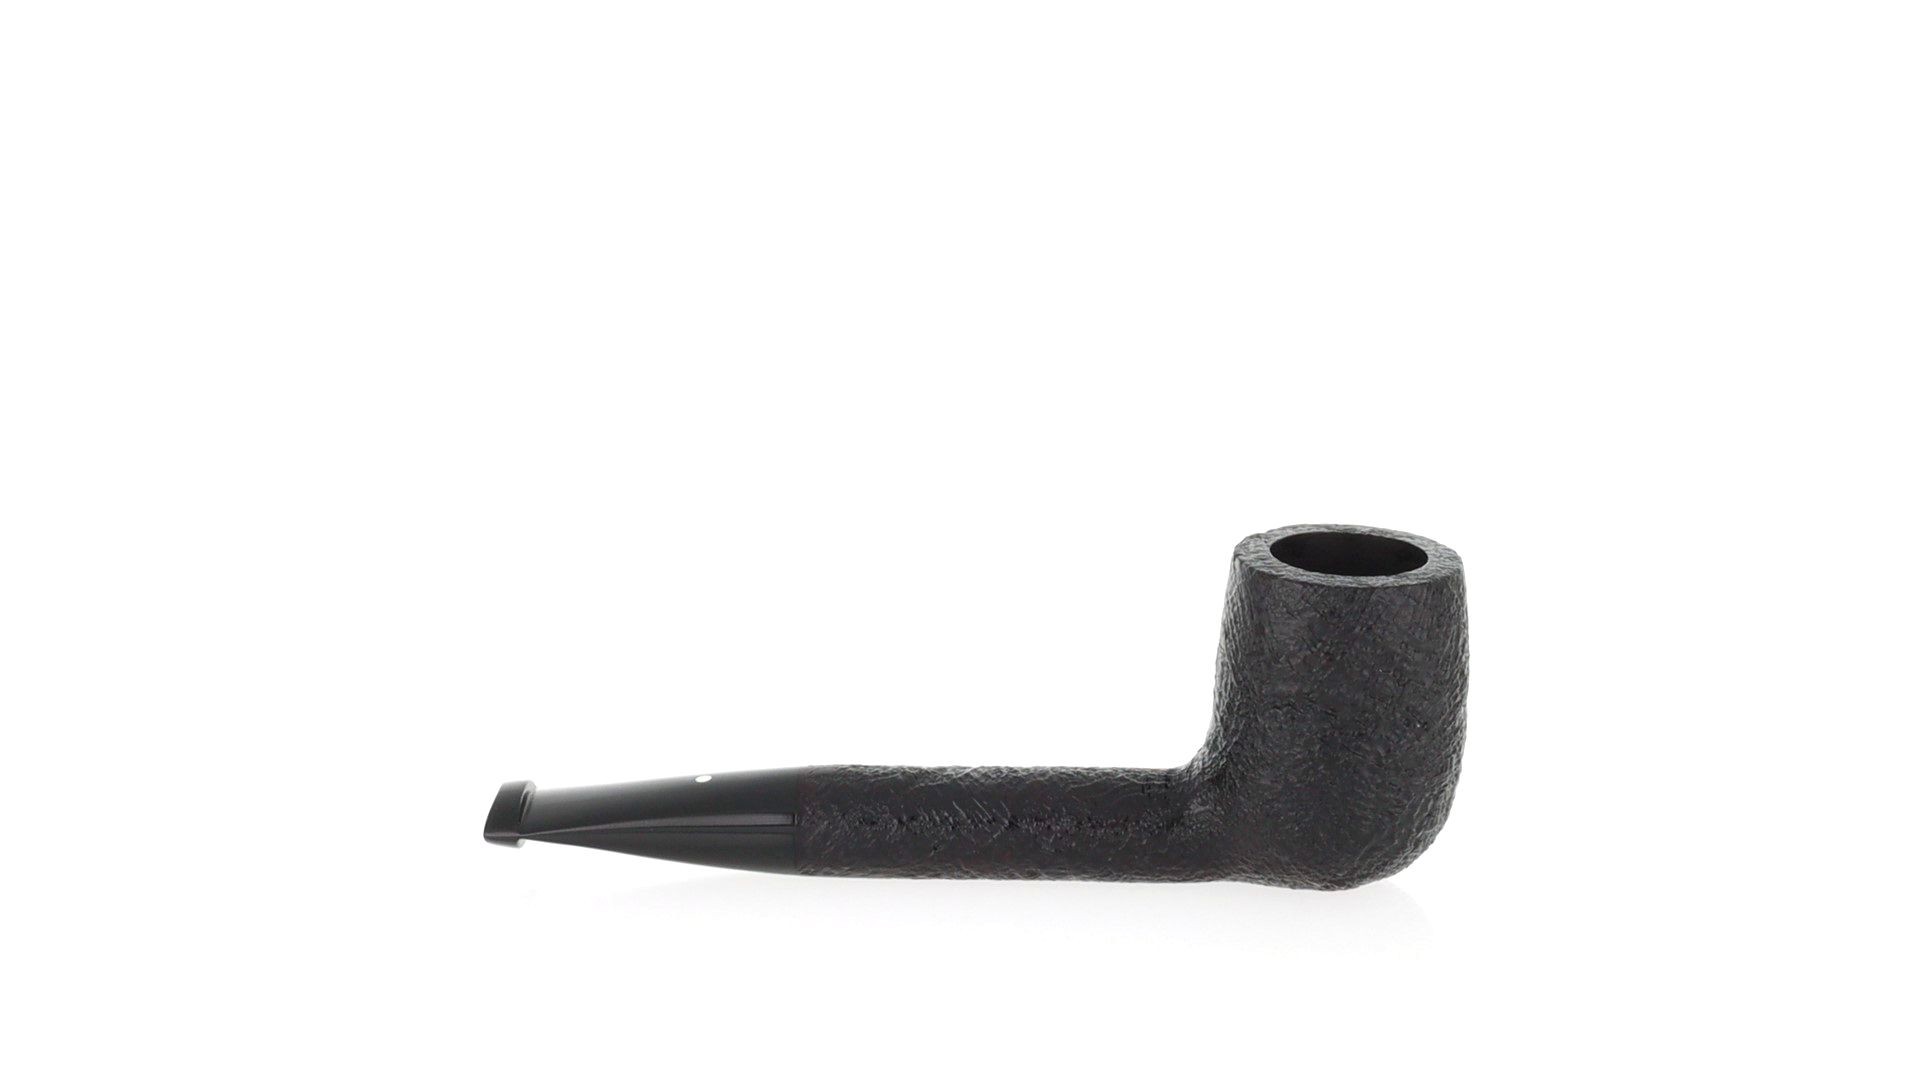 Pipa Dunhill Shell briar group 3 forma Liverpool